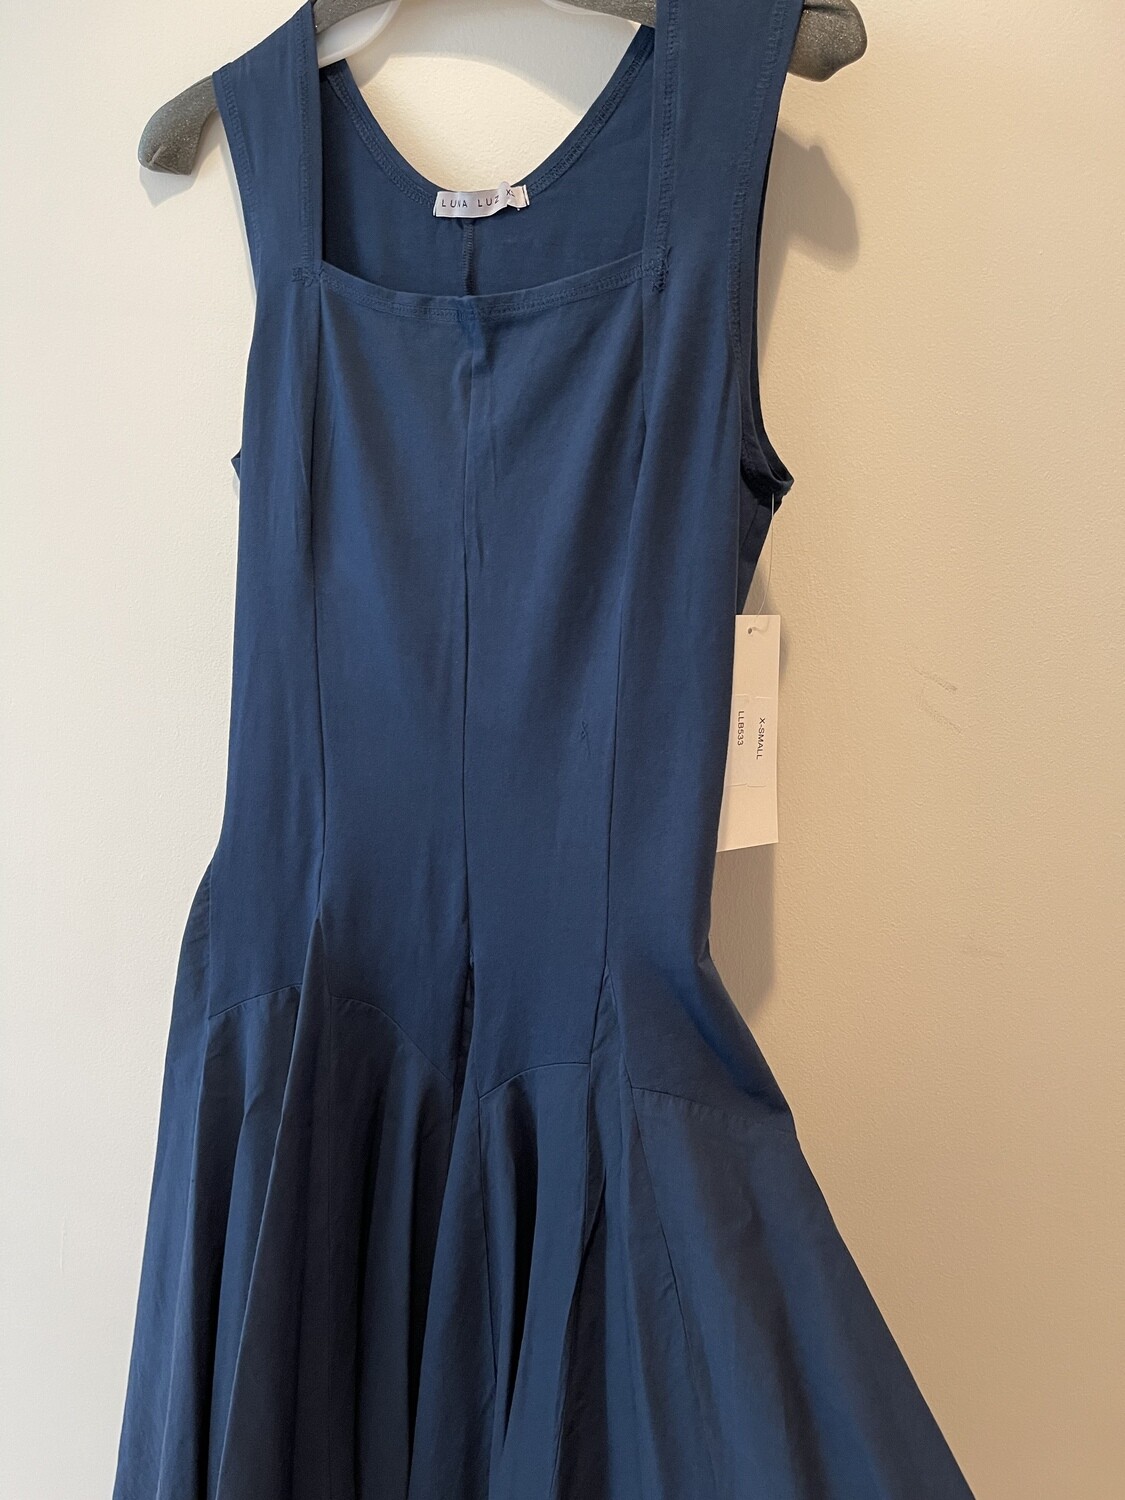 Luna Luz: Romantic Square Neck Dyed Midi Dress (Ships Immed in Solid Navy, 1 Left!)